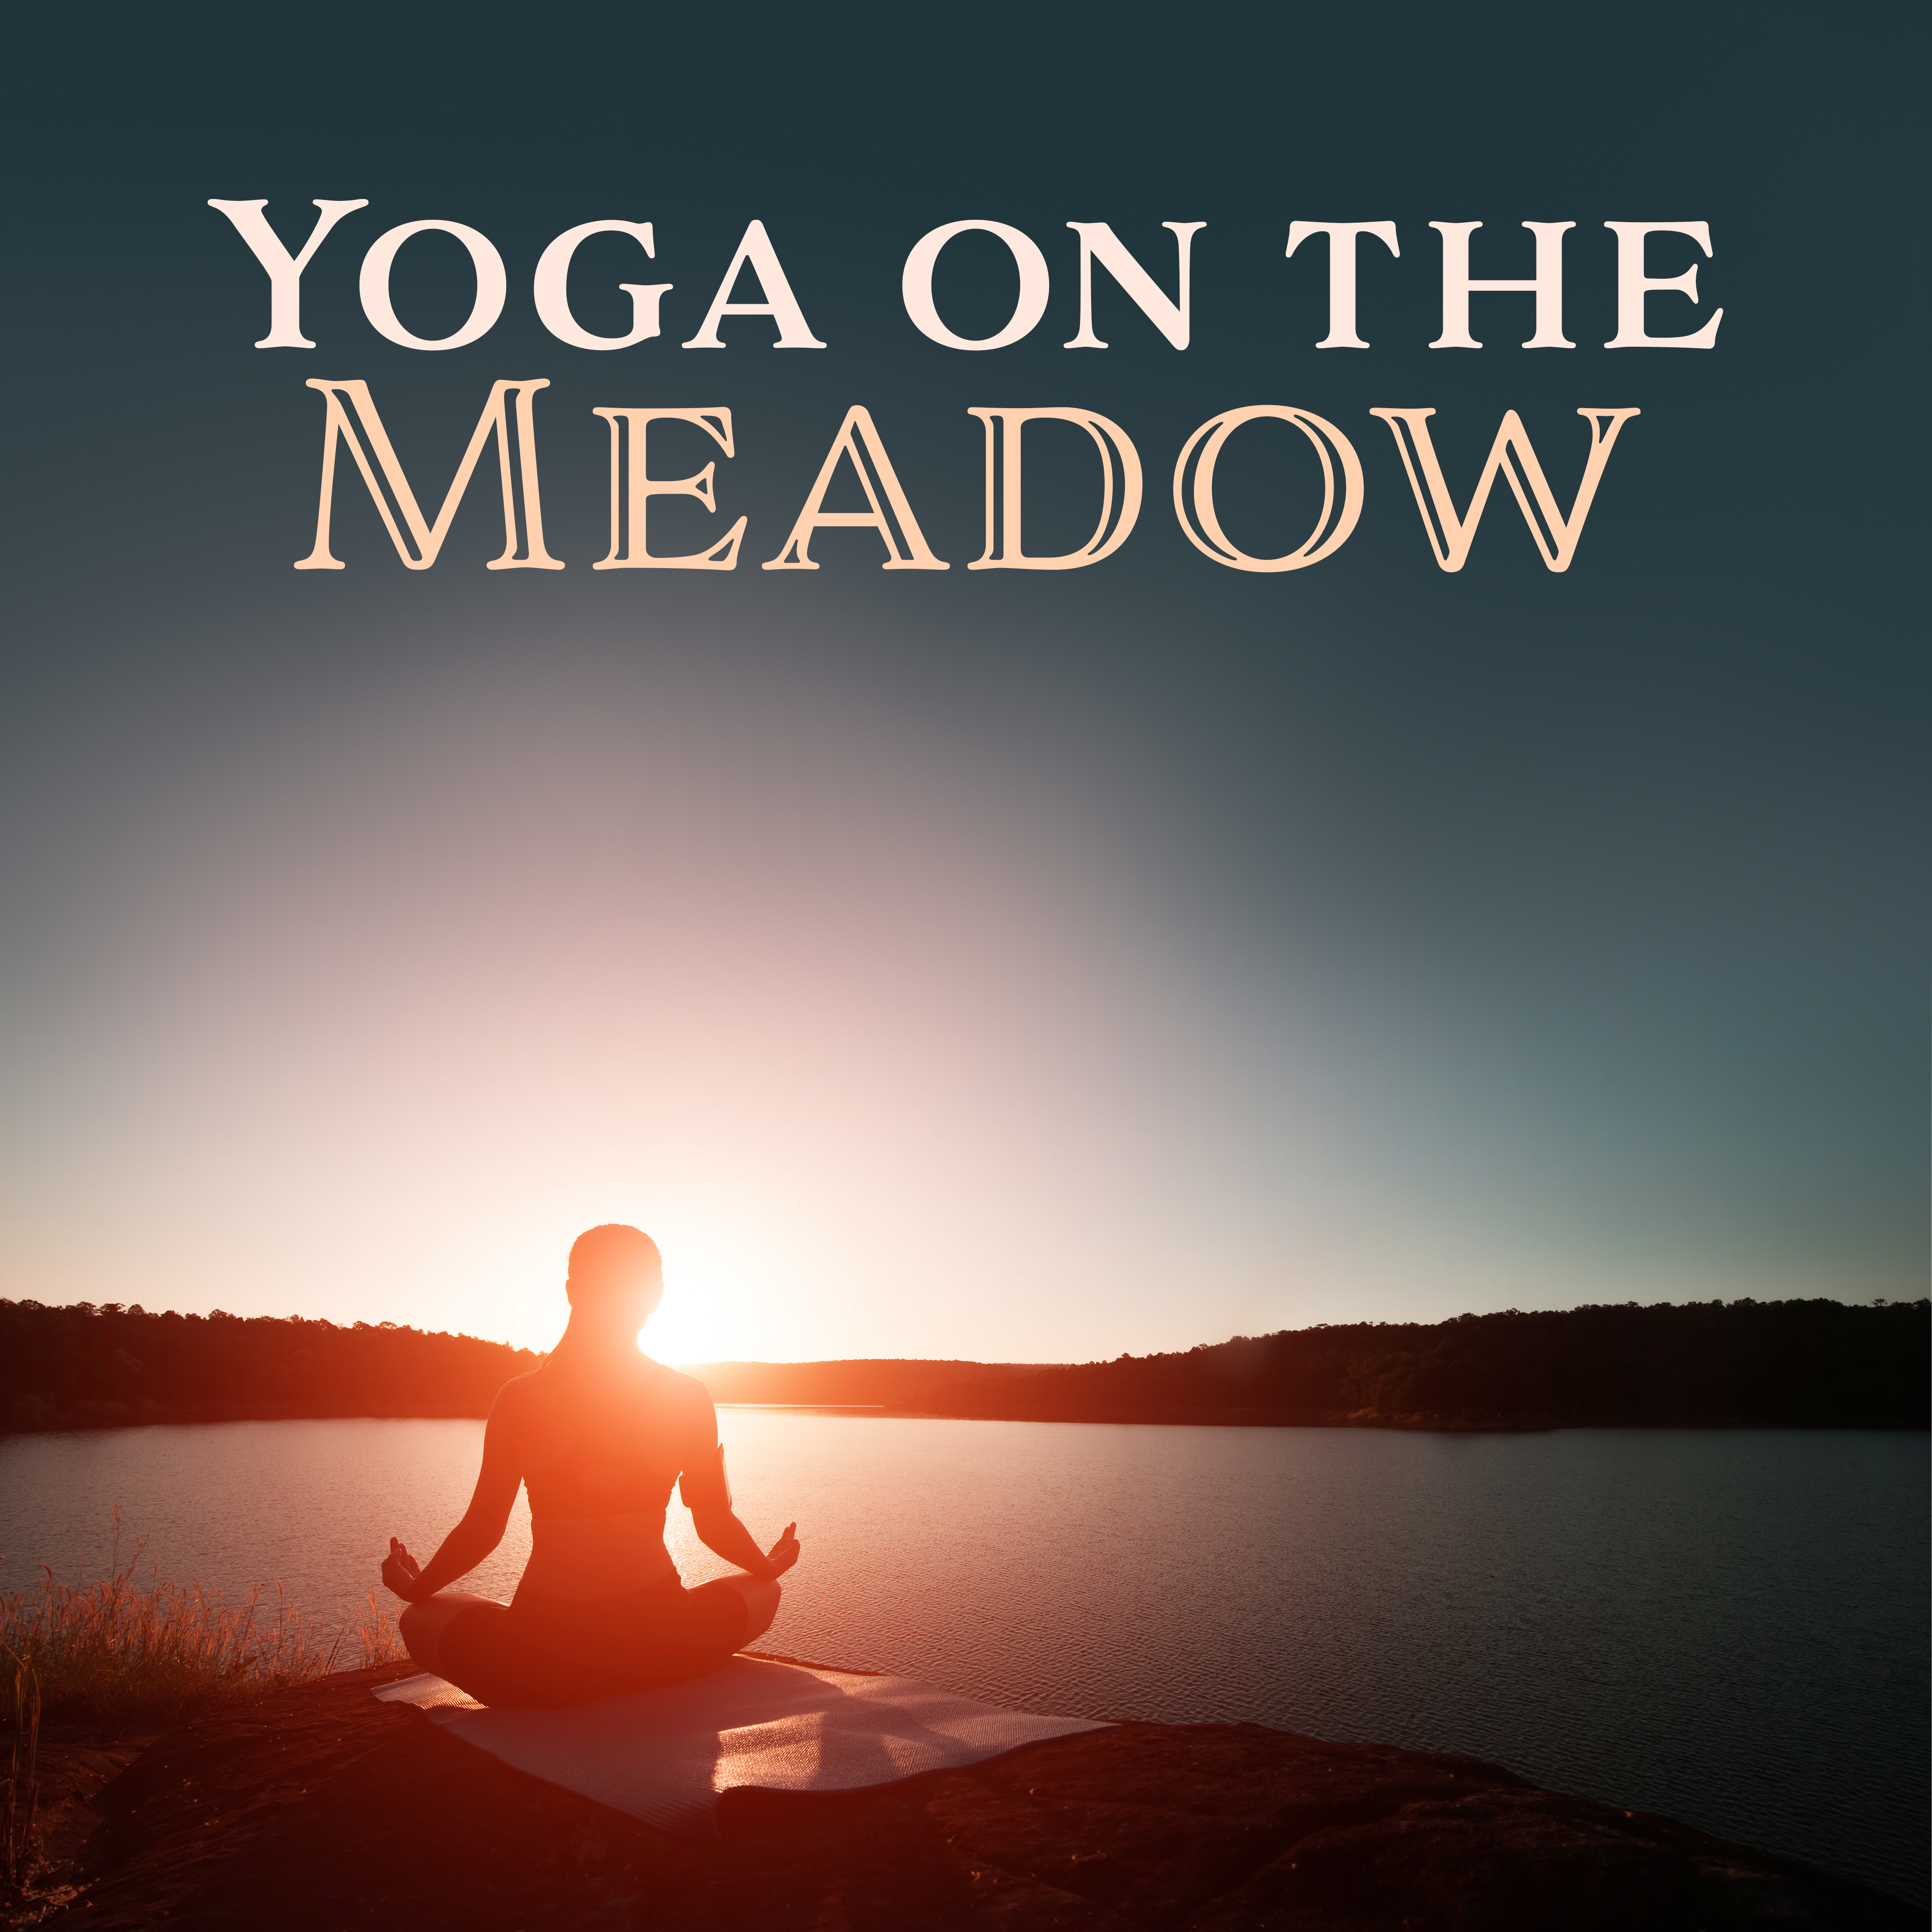 Yoga on the Meadow